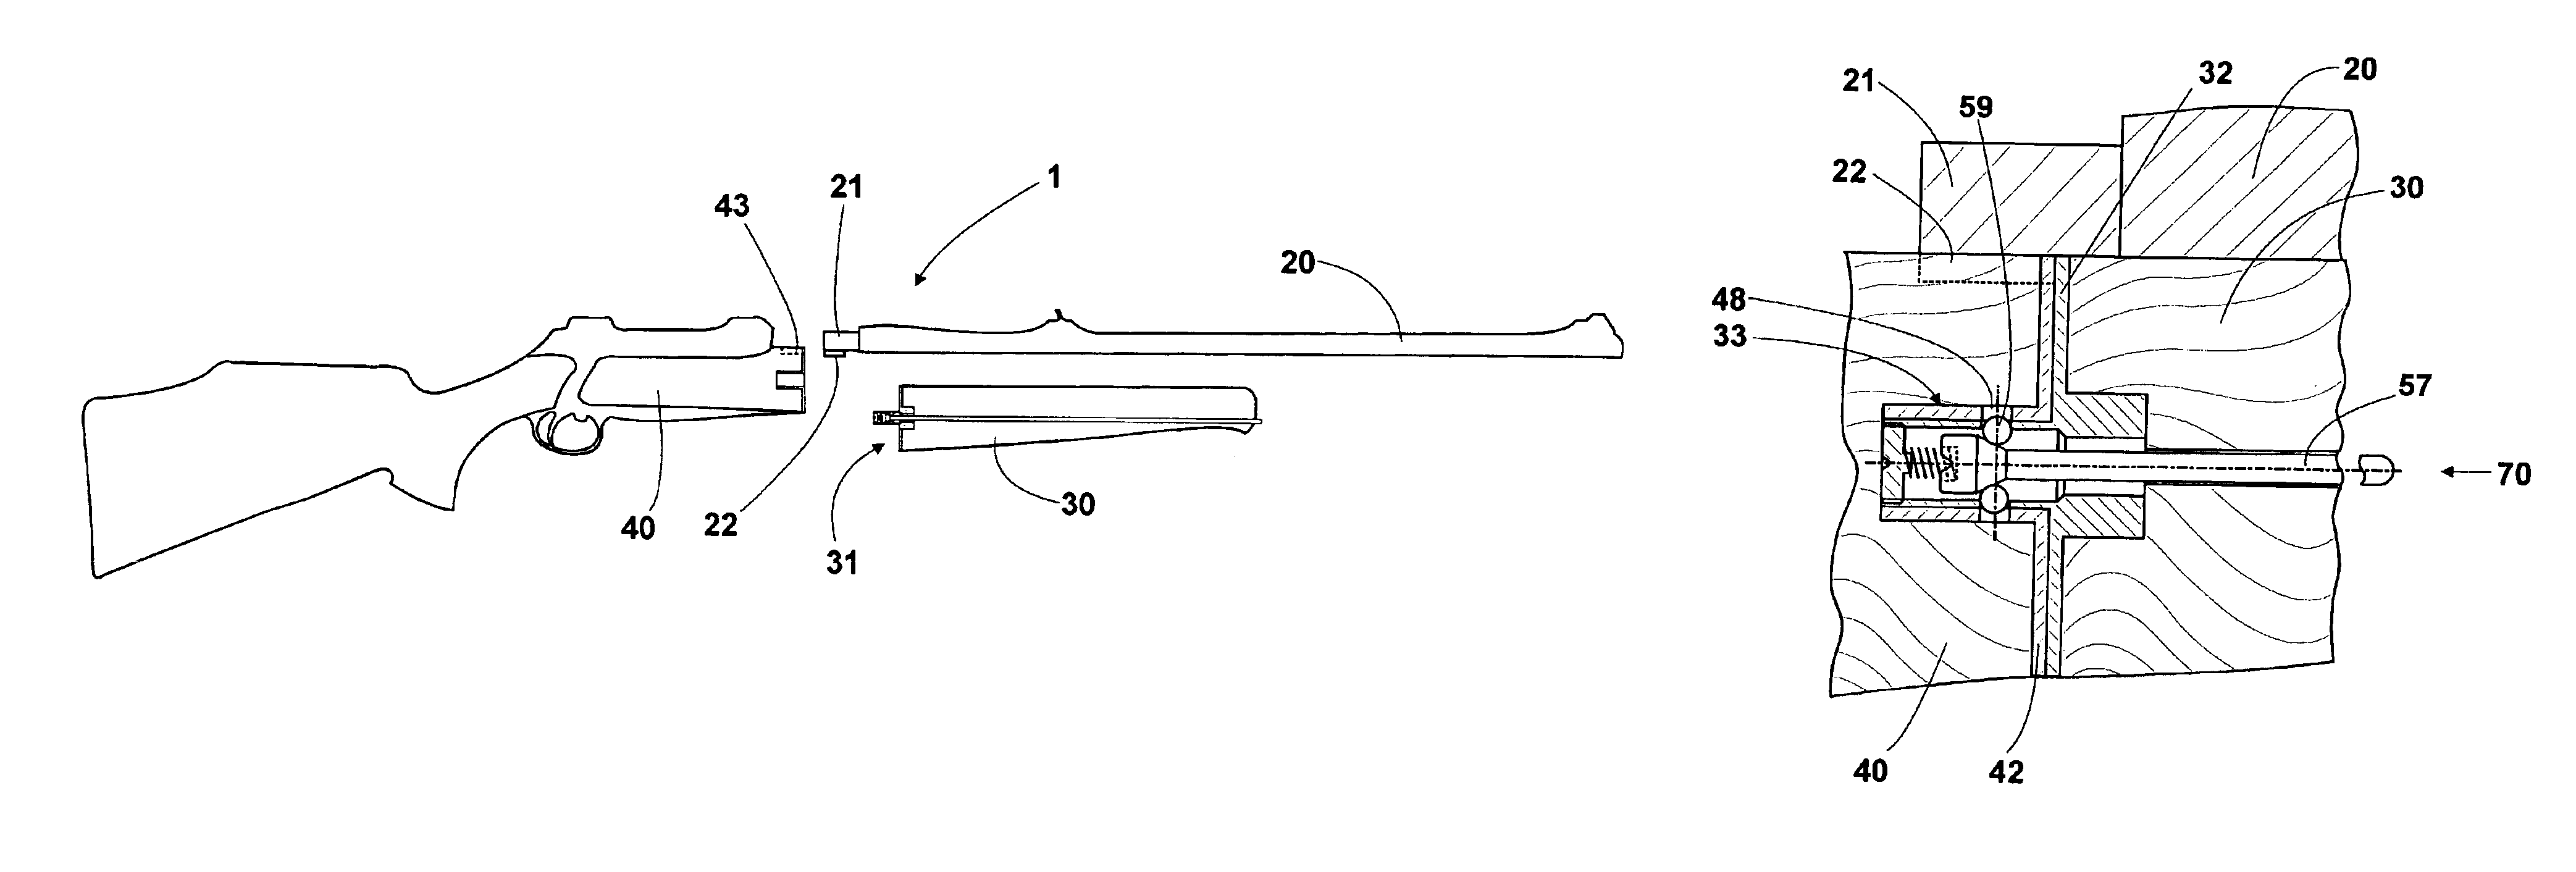 Rifle comprising a stock, a forearm and a barrel